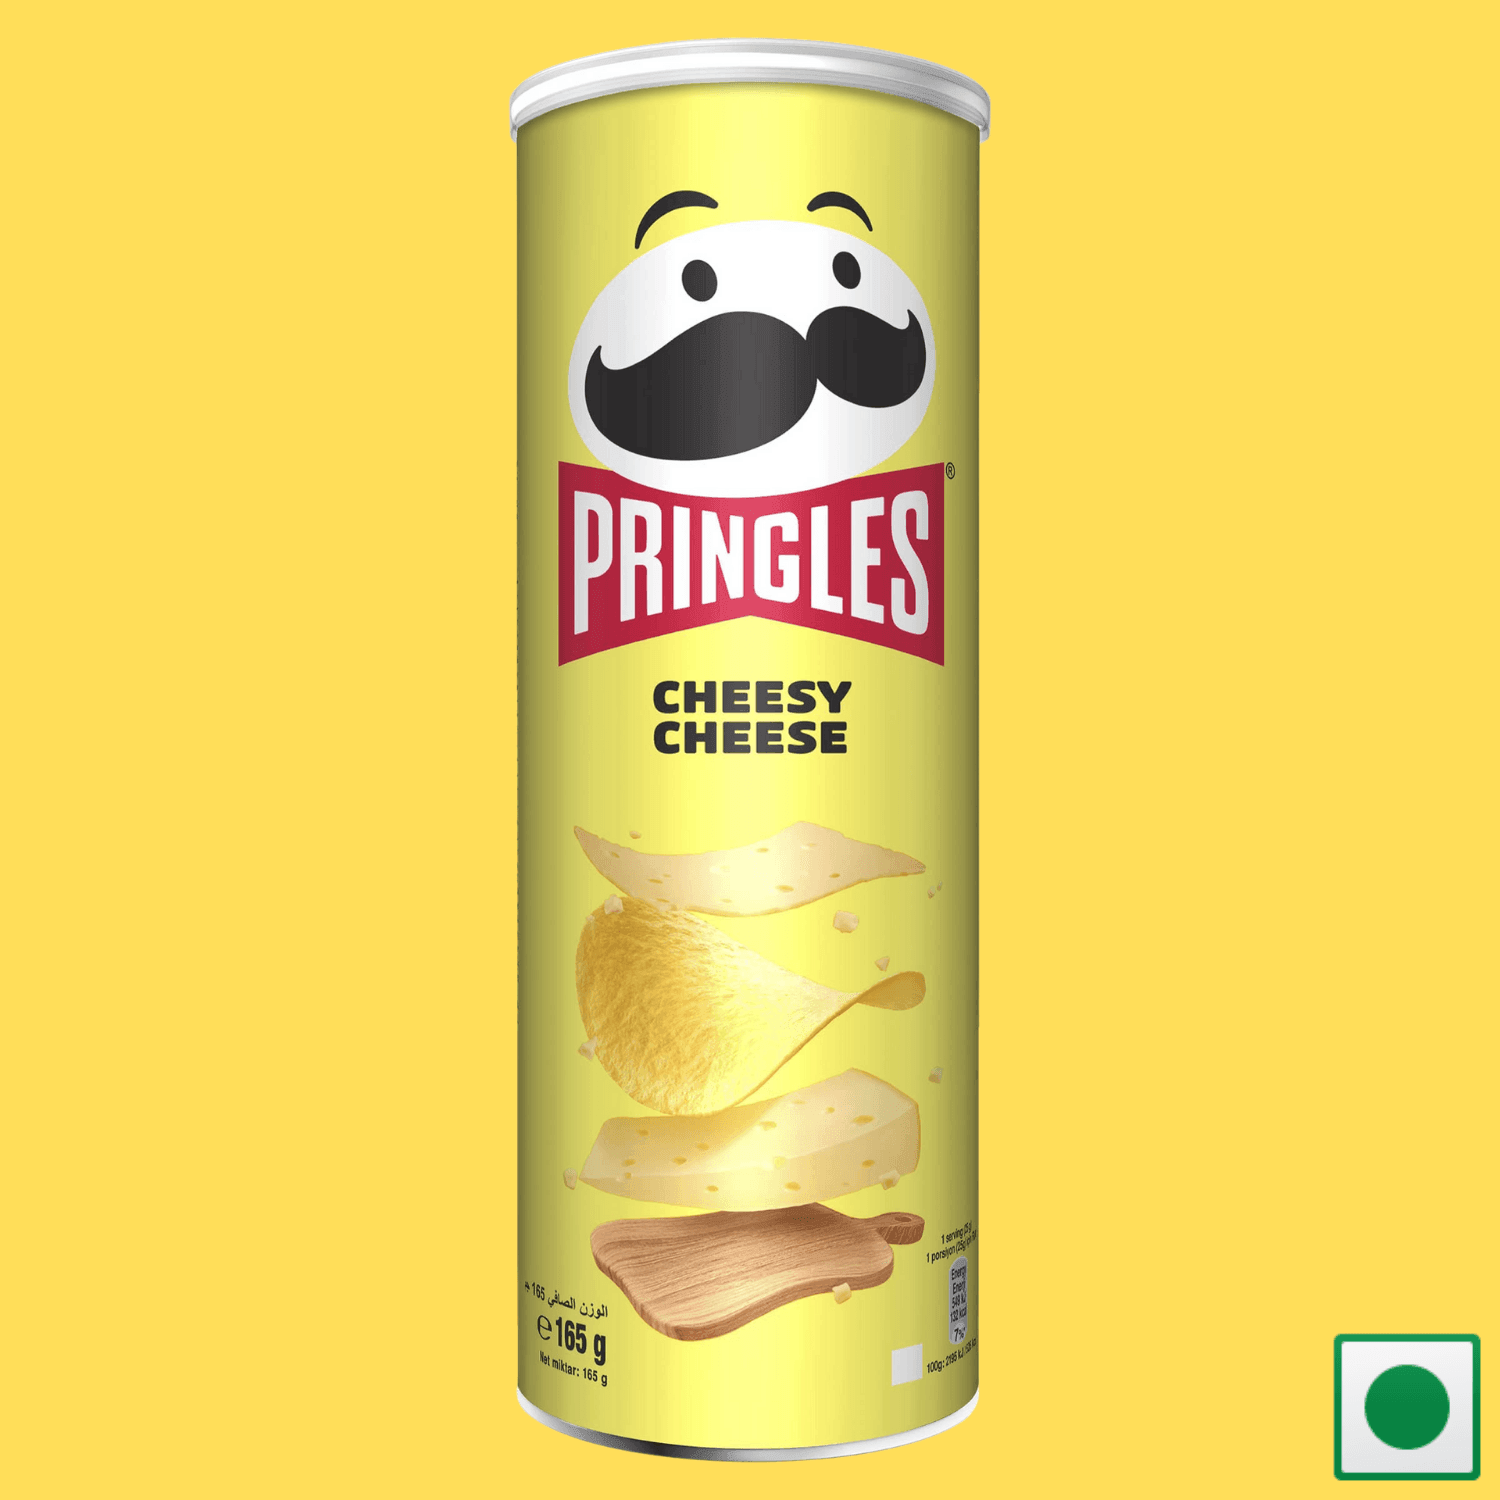 Pringles Cheesy Cheese, 165g (Imported) - Super 7 Mart